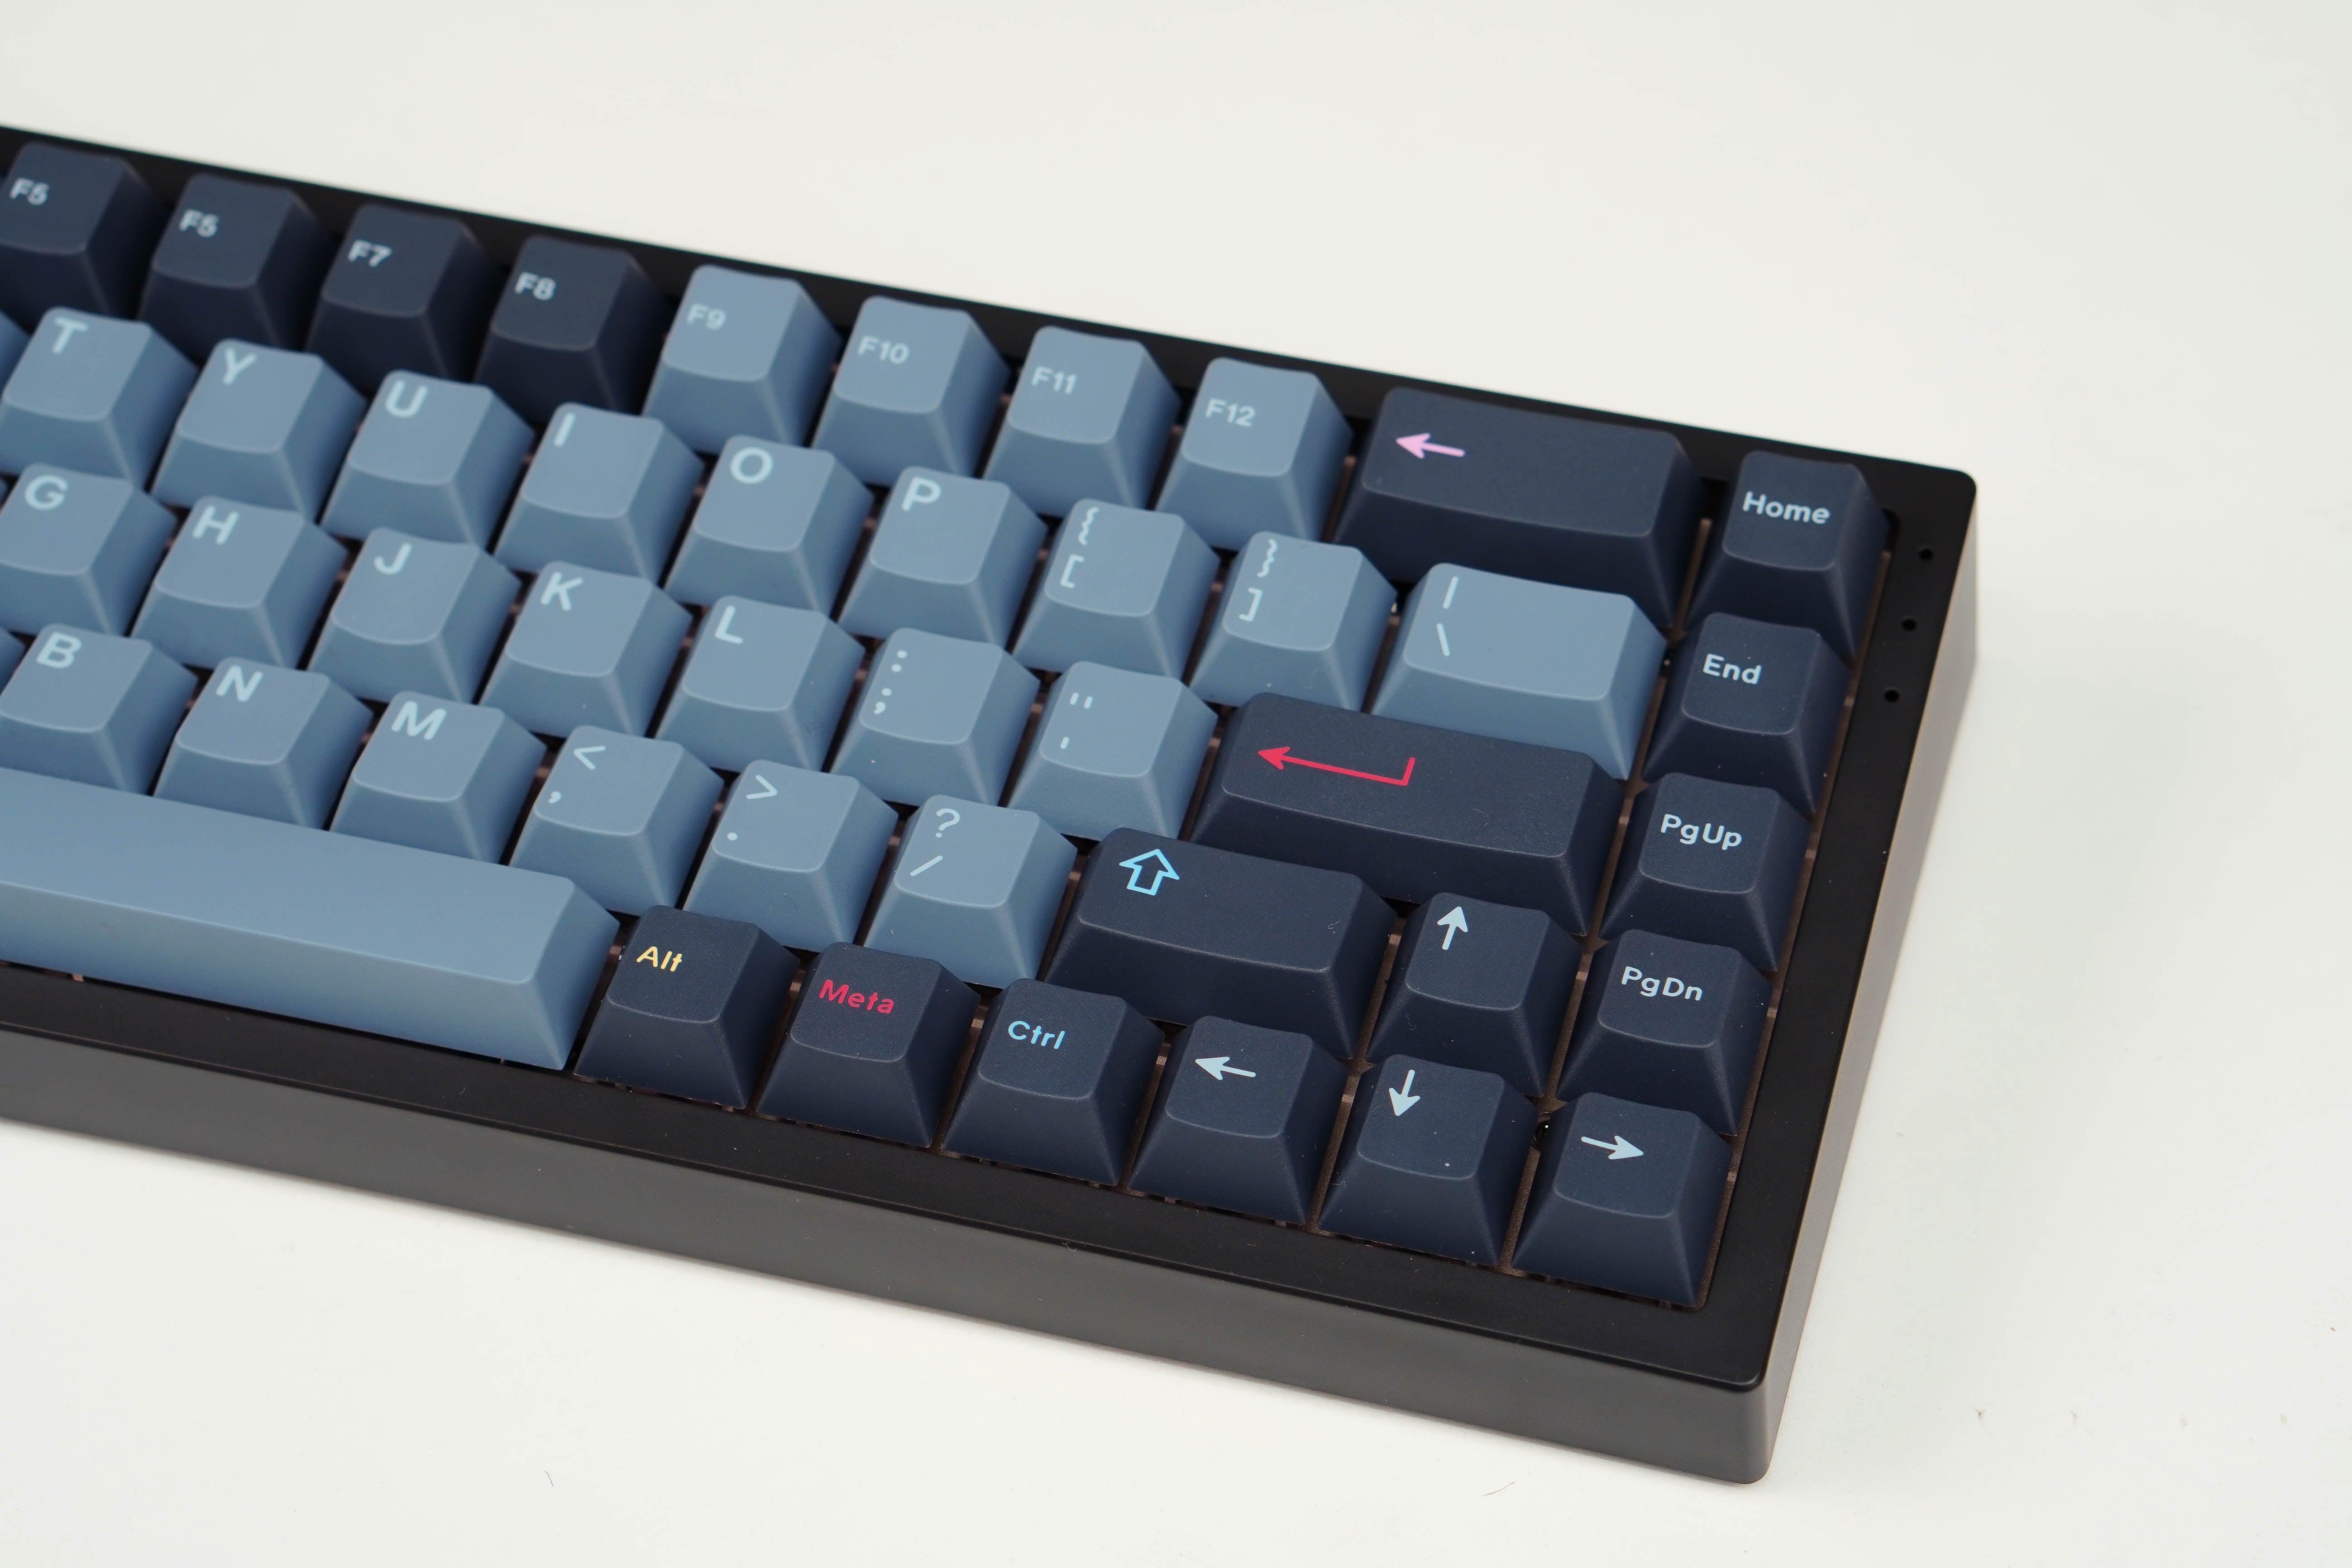 [In Stock] GMK Nord